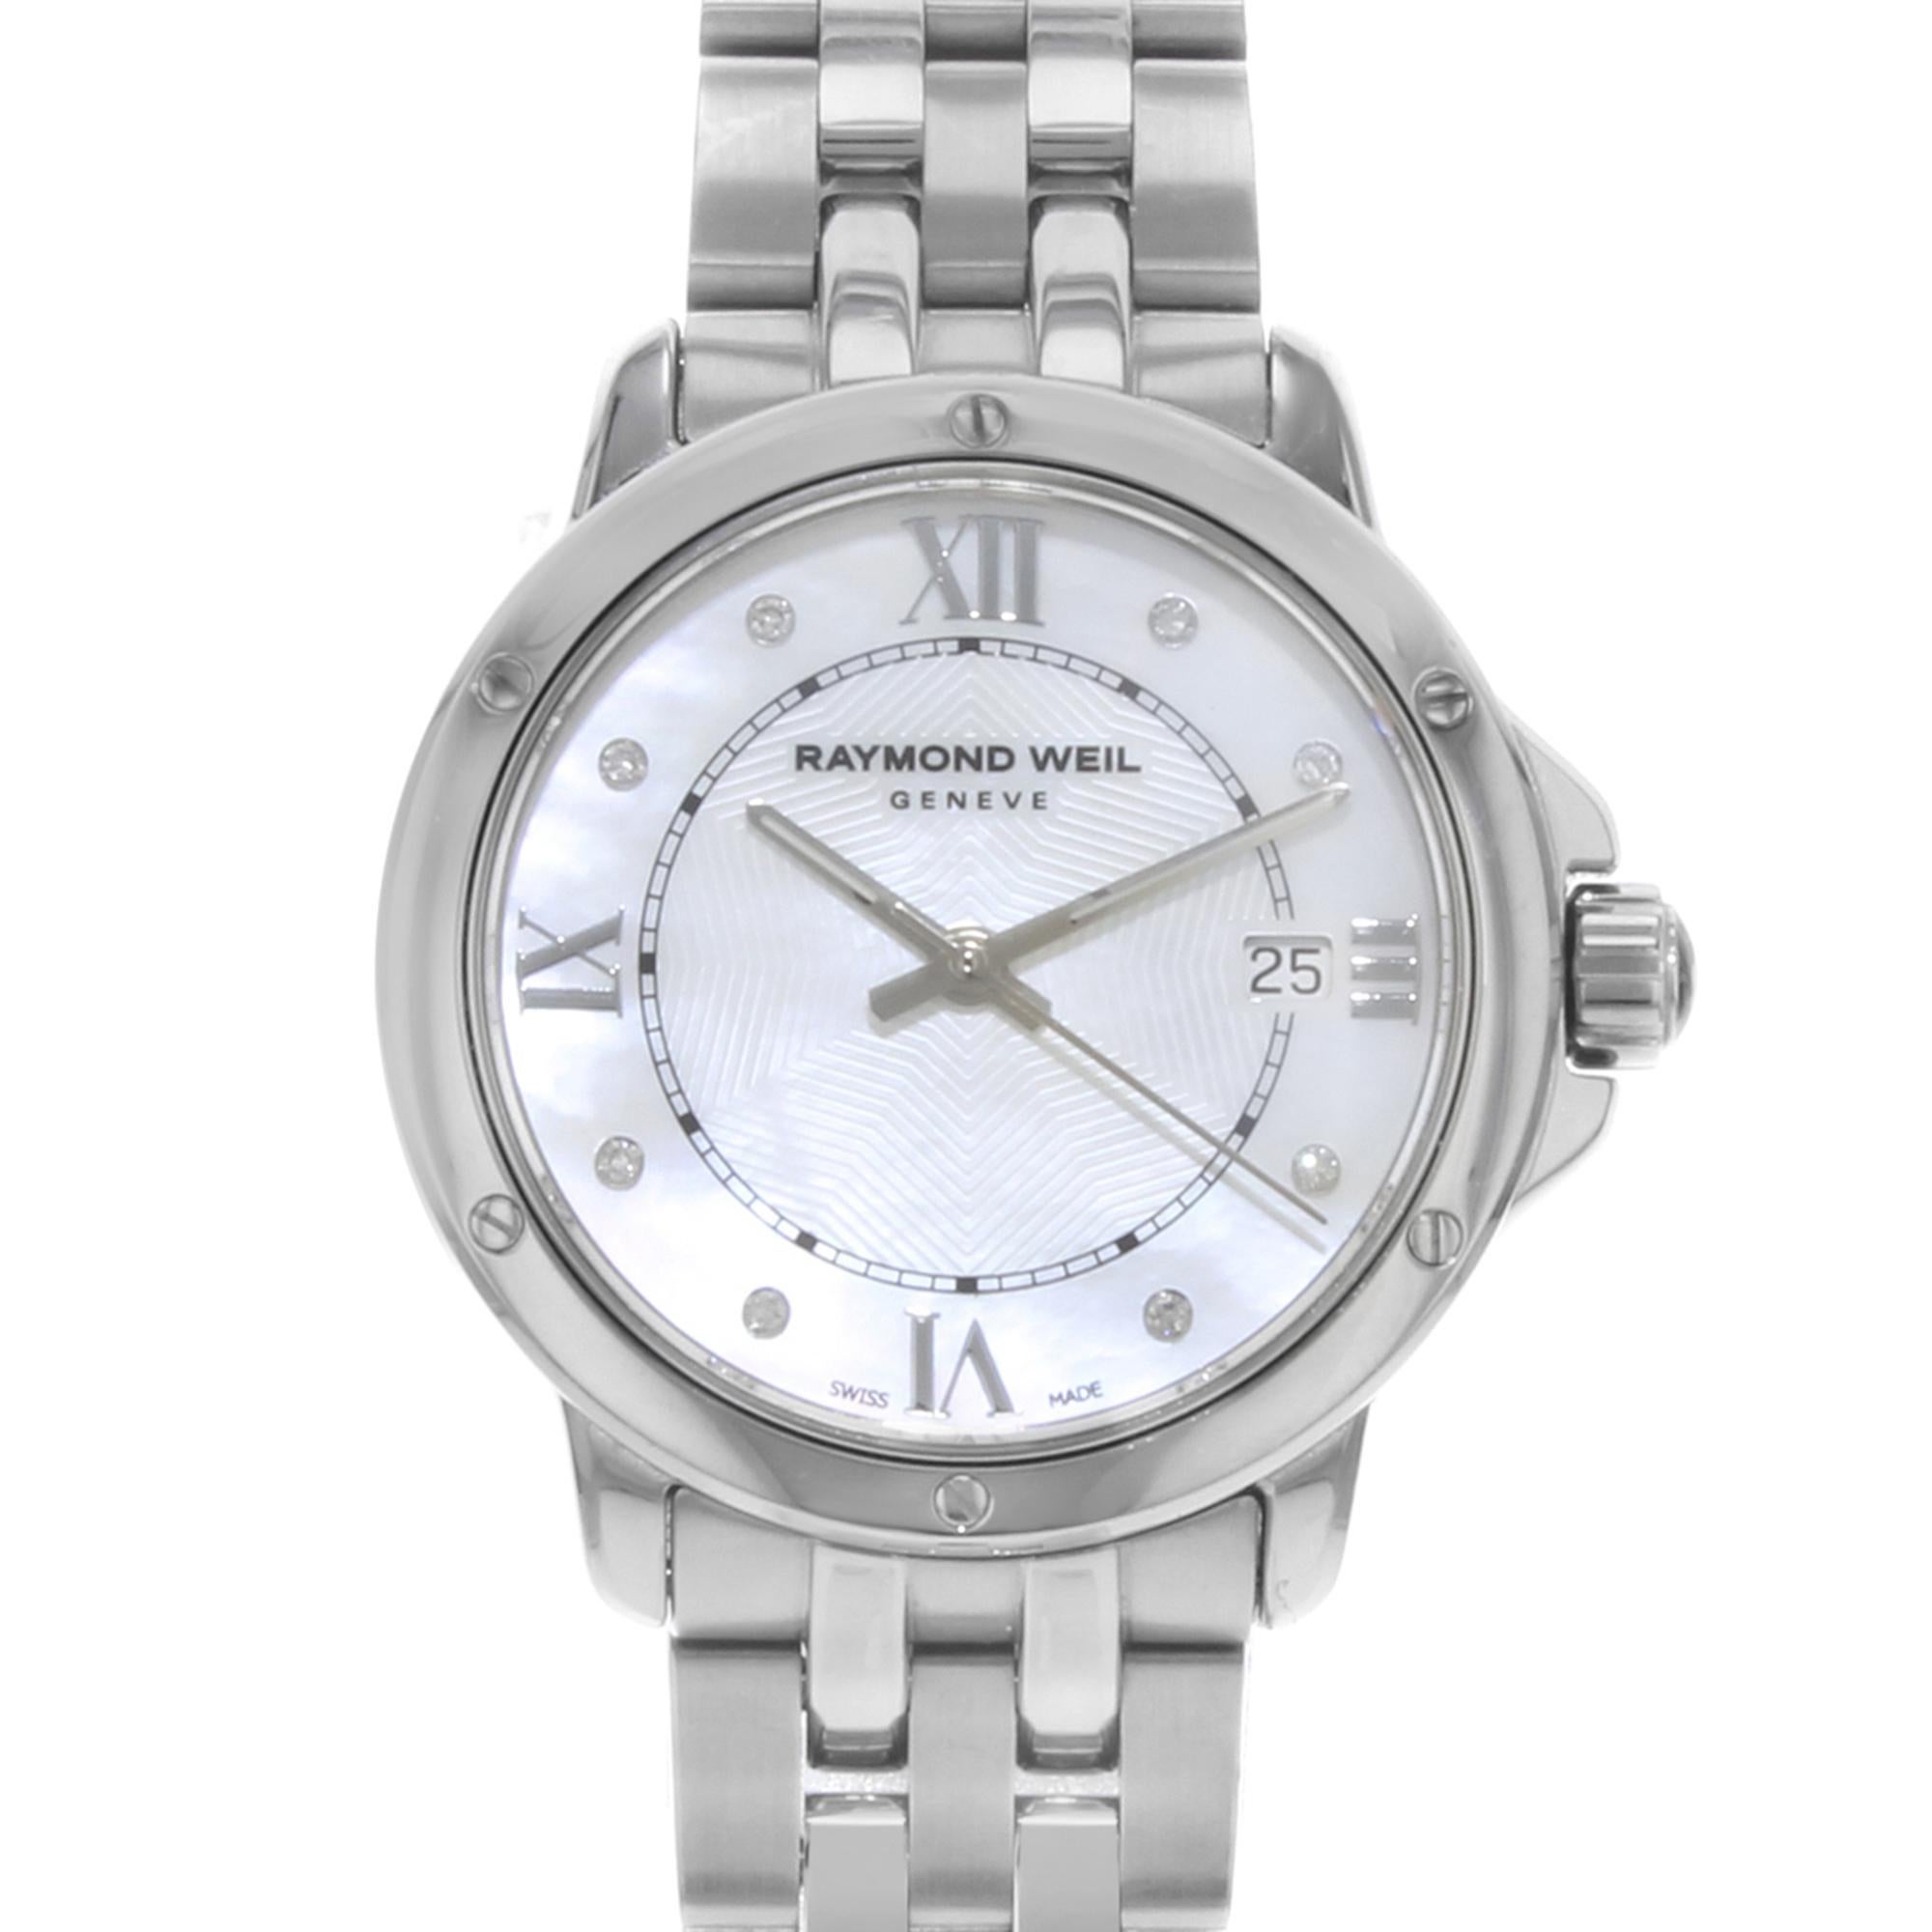 This display model Raymond Weil Tango 5391-ST-00995 is a beautiful Ladies timepiece that is powered by a quartz movement which is cased in a stainless steel case. It has a round shape face, date dial and has hand diamonds, roman numerals style